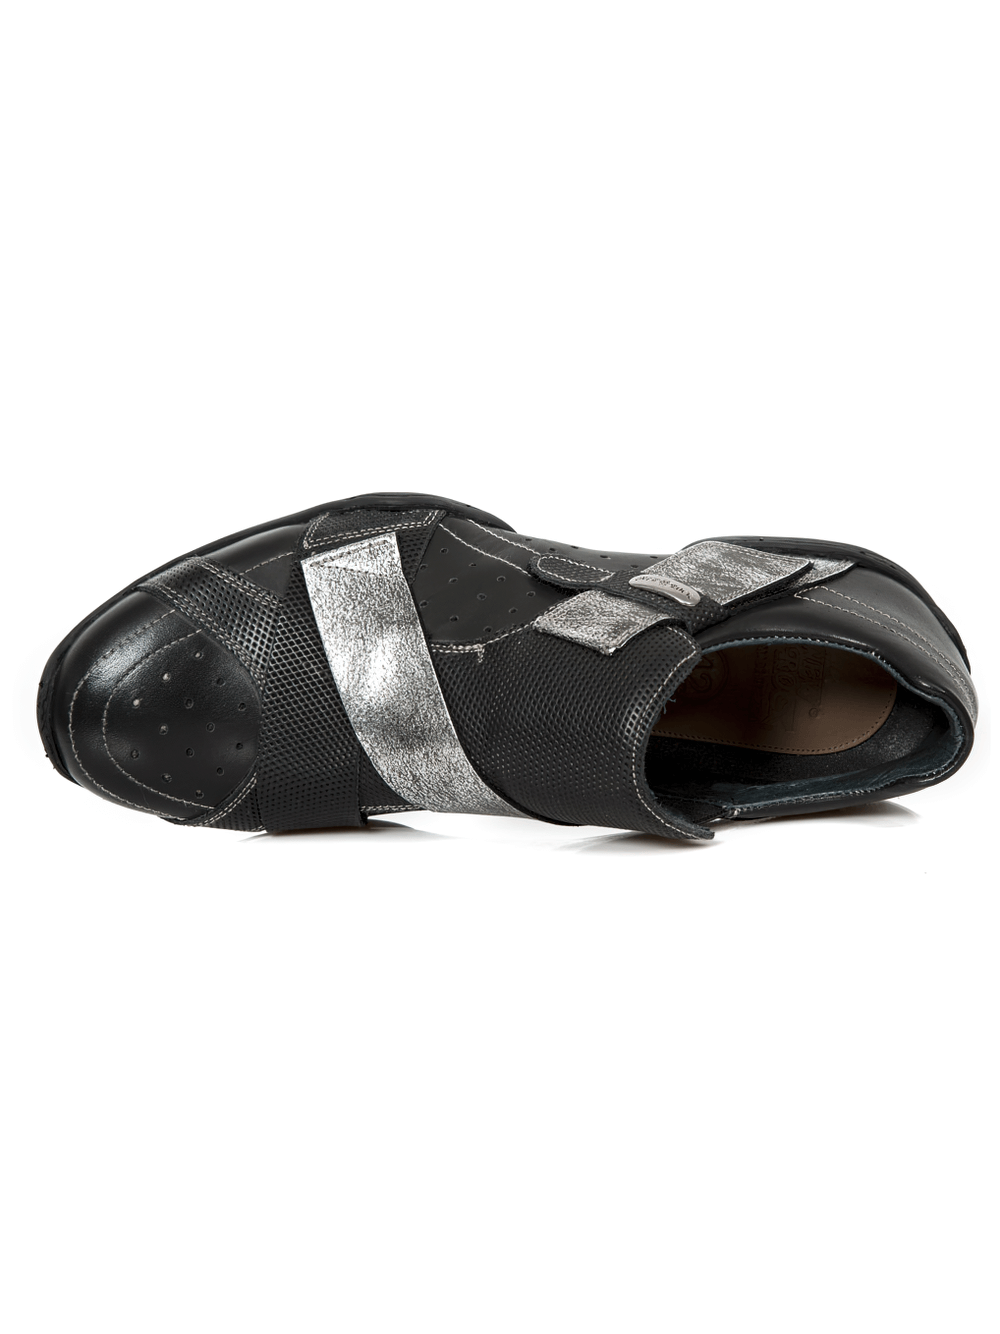 NEW ROCK Men's Black Rock Shoes With Silver Velcro Strap